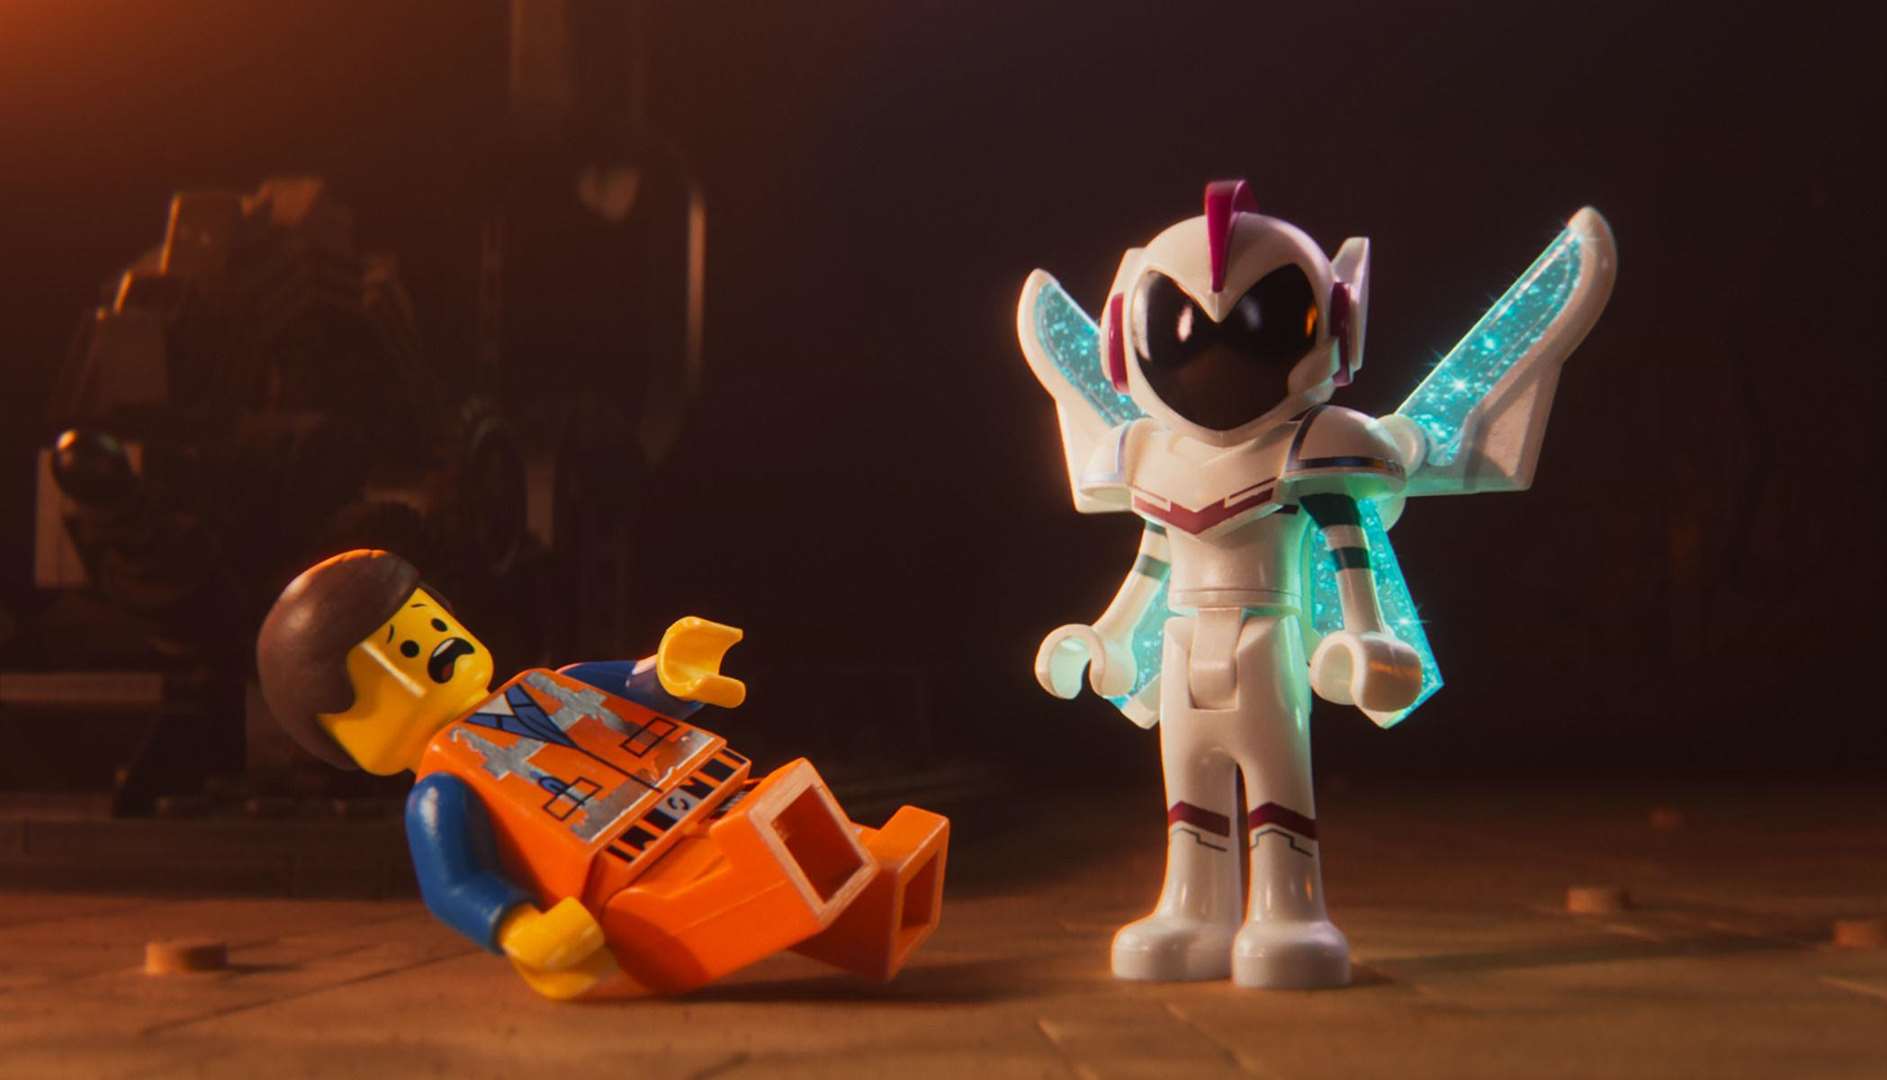 The Lego Movie 2. Pictured: Emmet (voiced by Chris Pratt) and General Mayhem (Stefanie Beatriz). Picture credit: PA Photo/Warner Bros. Entertainment Inc./Eric Charbonneau. All Rights Reserved.